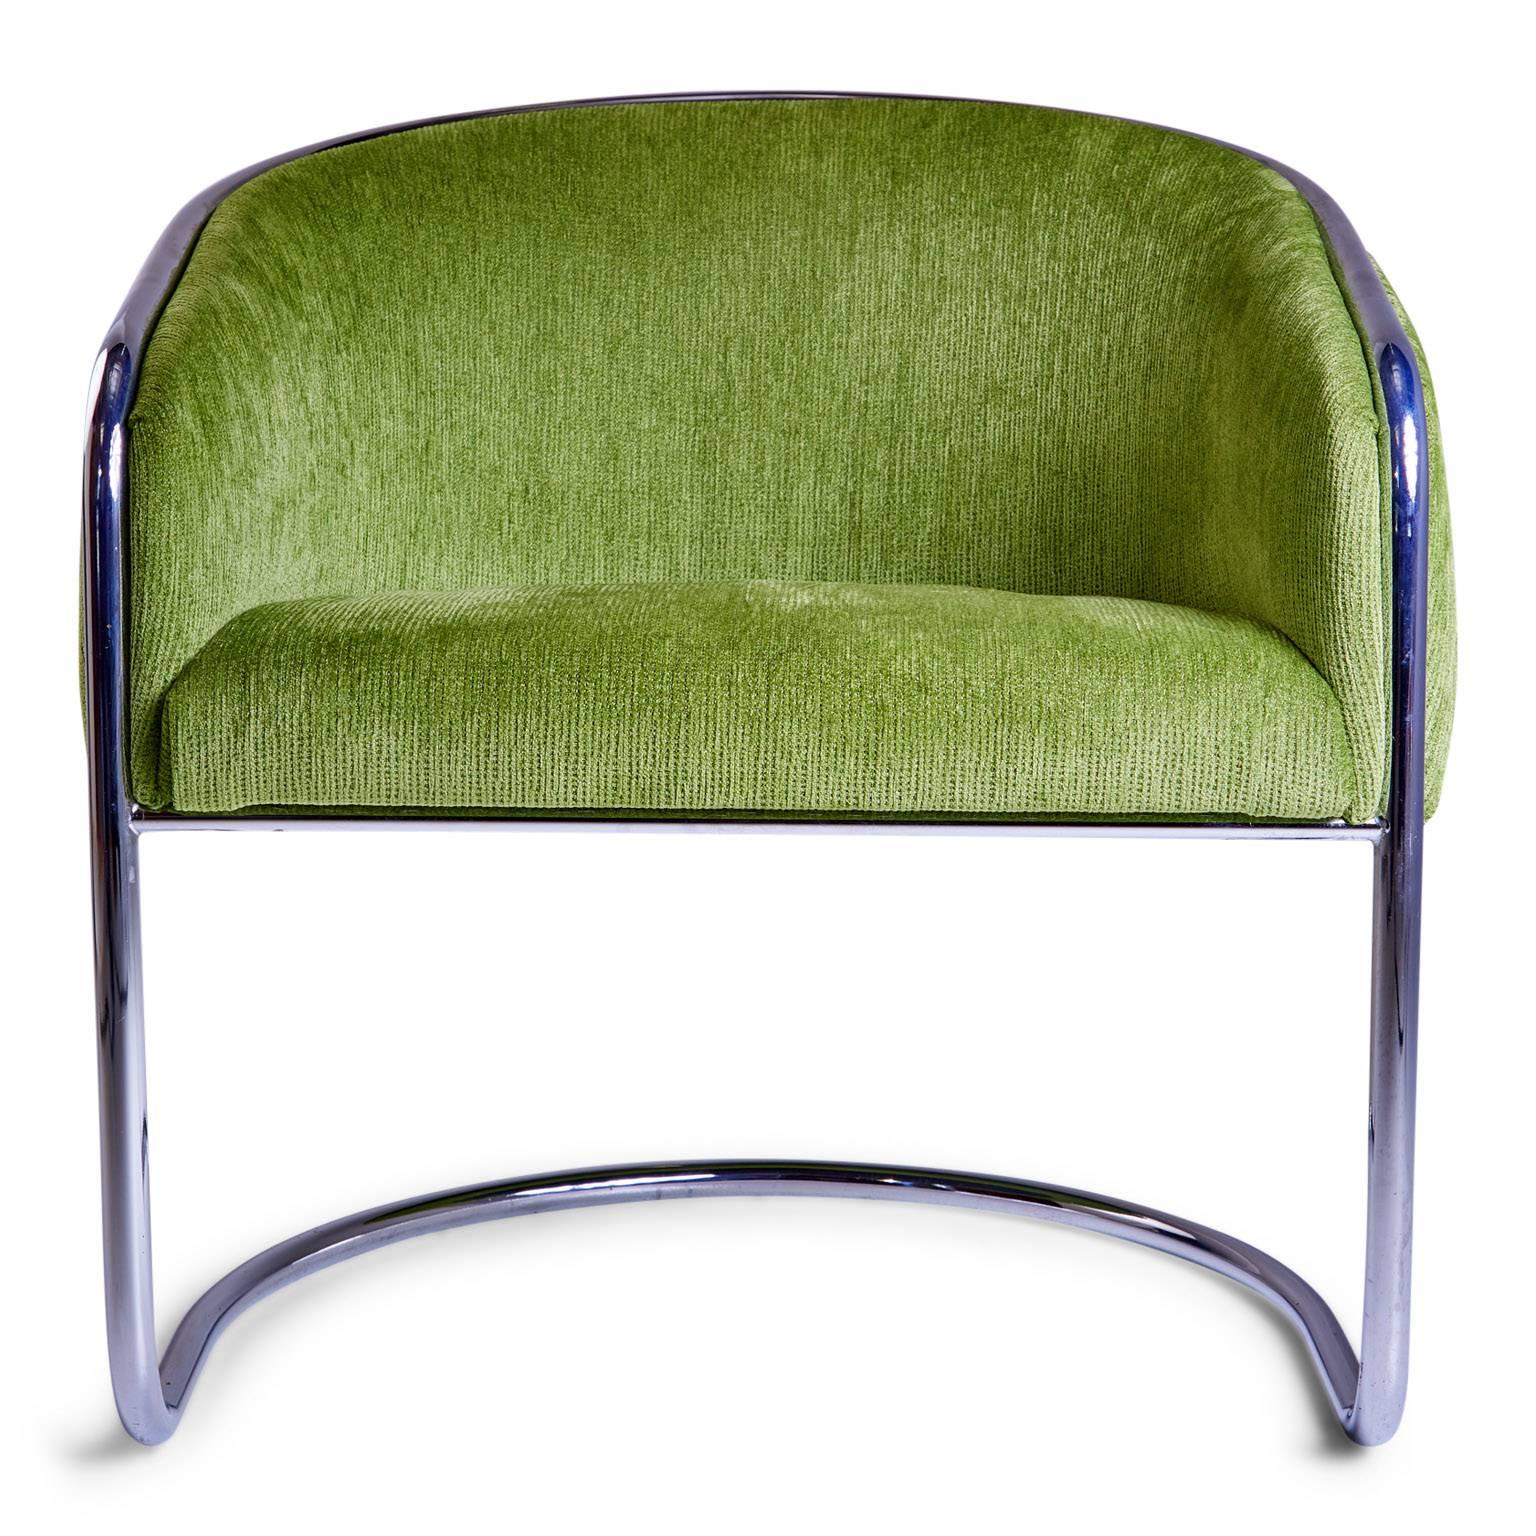 Sculptural armchair by Anton Lorenz for Thonet that possess graceful usage of arches and contours. Featuring a sleek chrome cantilever base which extends to encase the arms and the back and vibrant green plush chenille upholstery. 

This club